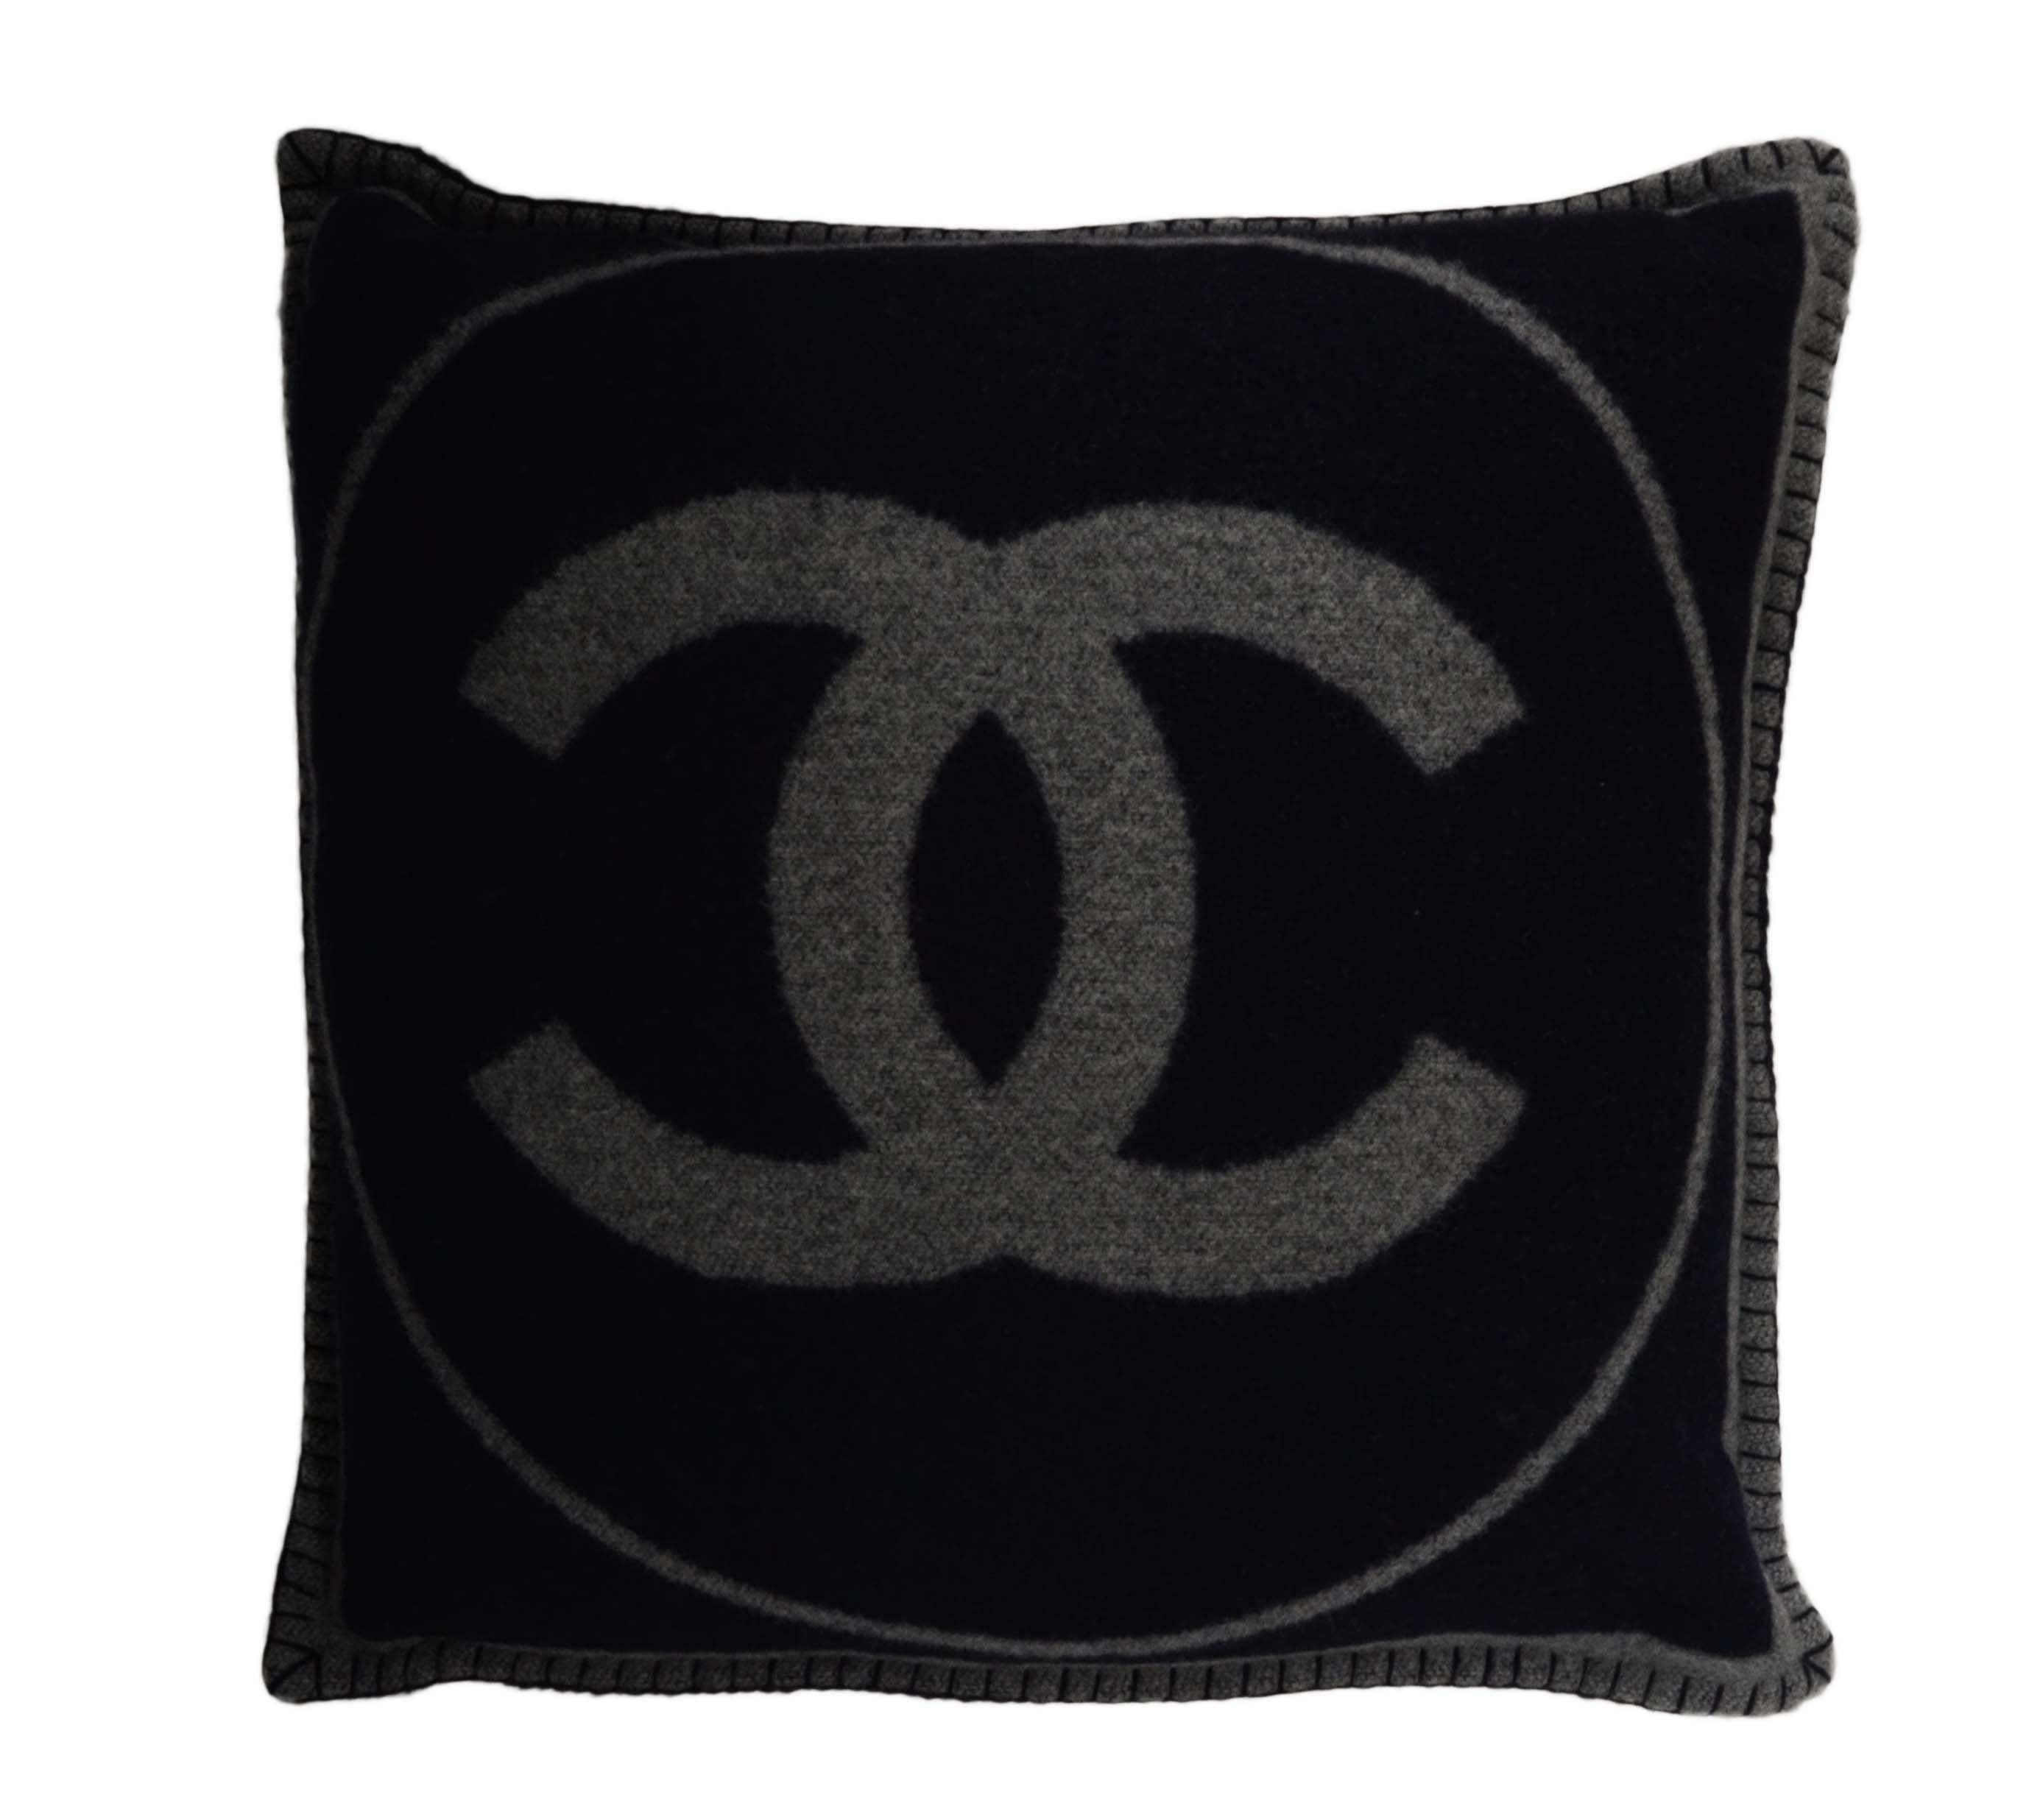 Chanel Grey & Navy Merino CC Pillow 
Features Grey CC on one side and blue CC on other
Made In: Scotland
Year of Production: 2013
Color: Grey and navy
Composition: 90% merino wool, 10% cashmere
Lining: 100% cotton
Filling: Duck